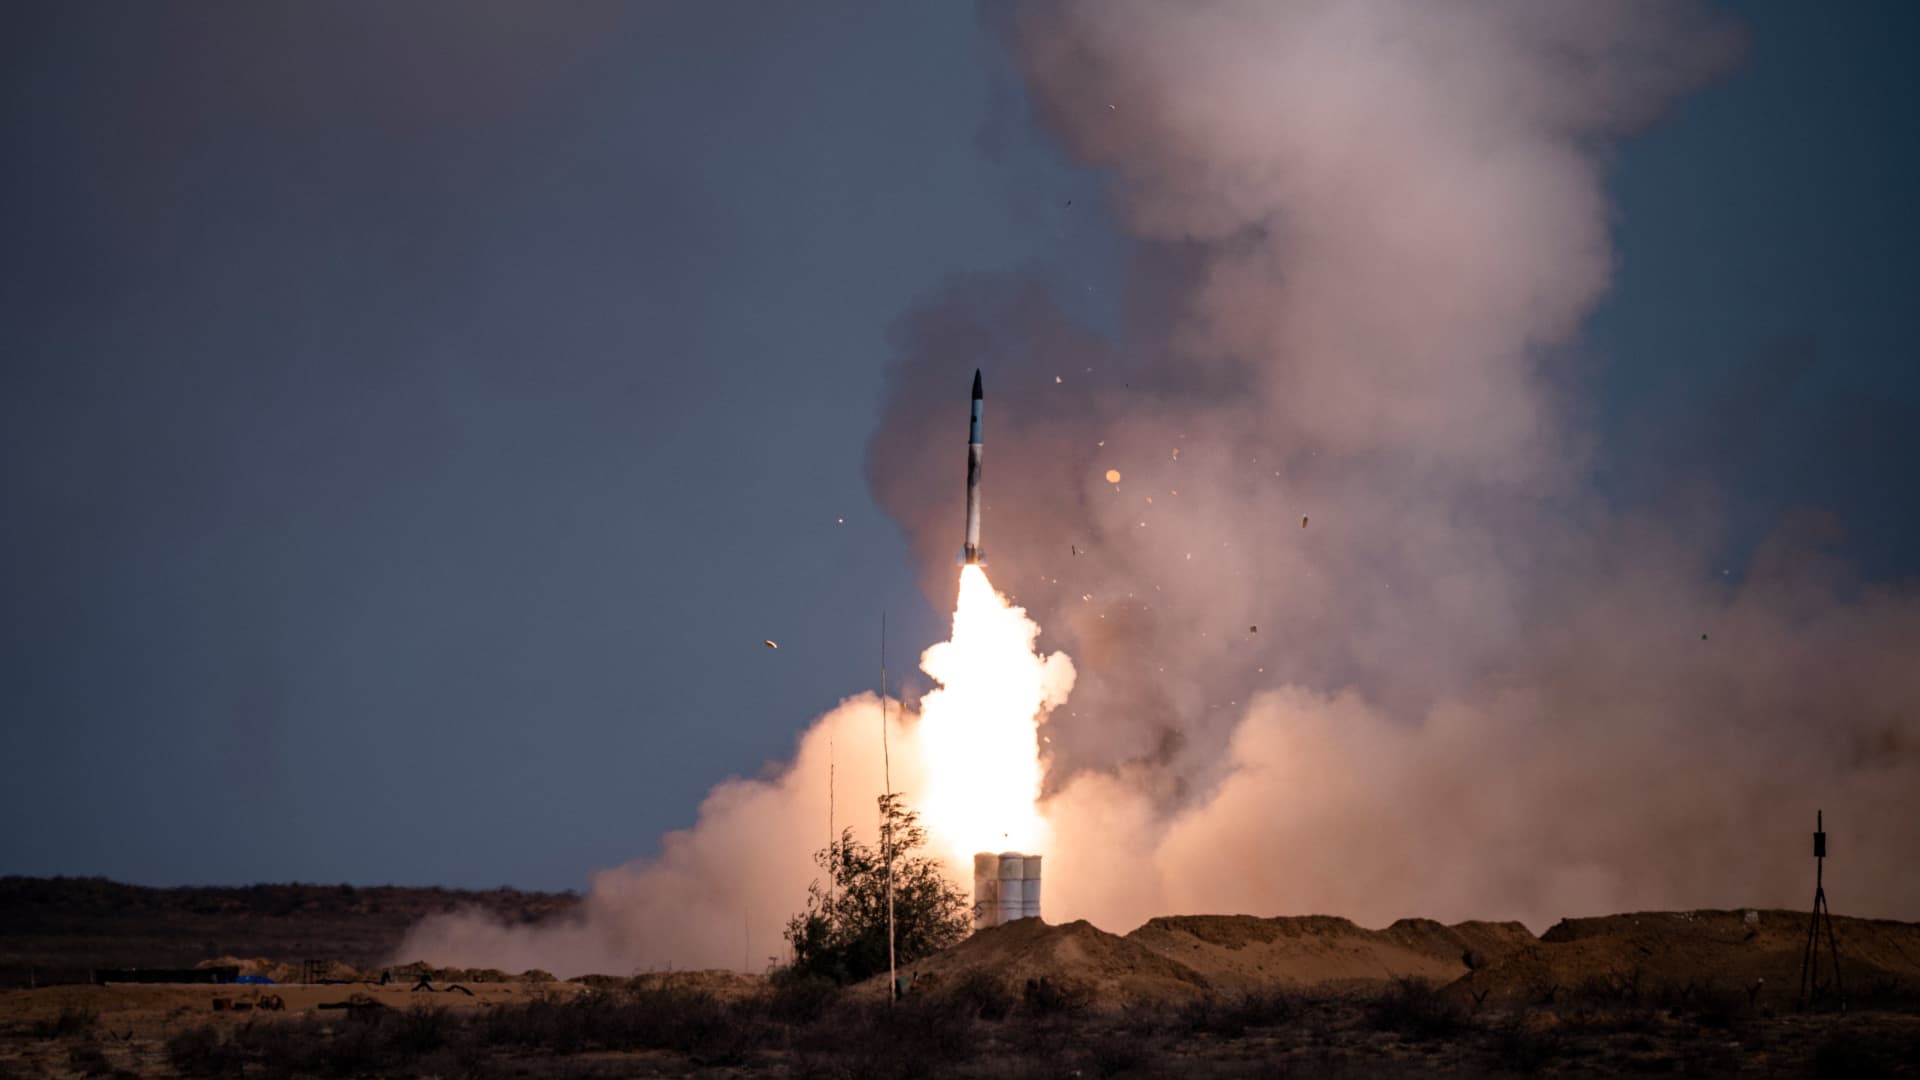 A rocket launches from an S-400 missile system at the Ashuluk military base in Southern Russia on Sept. 22, 2020.